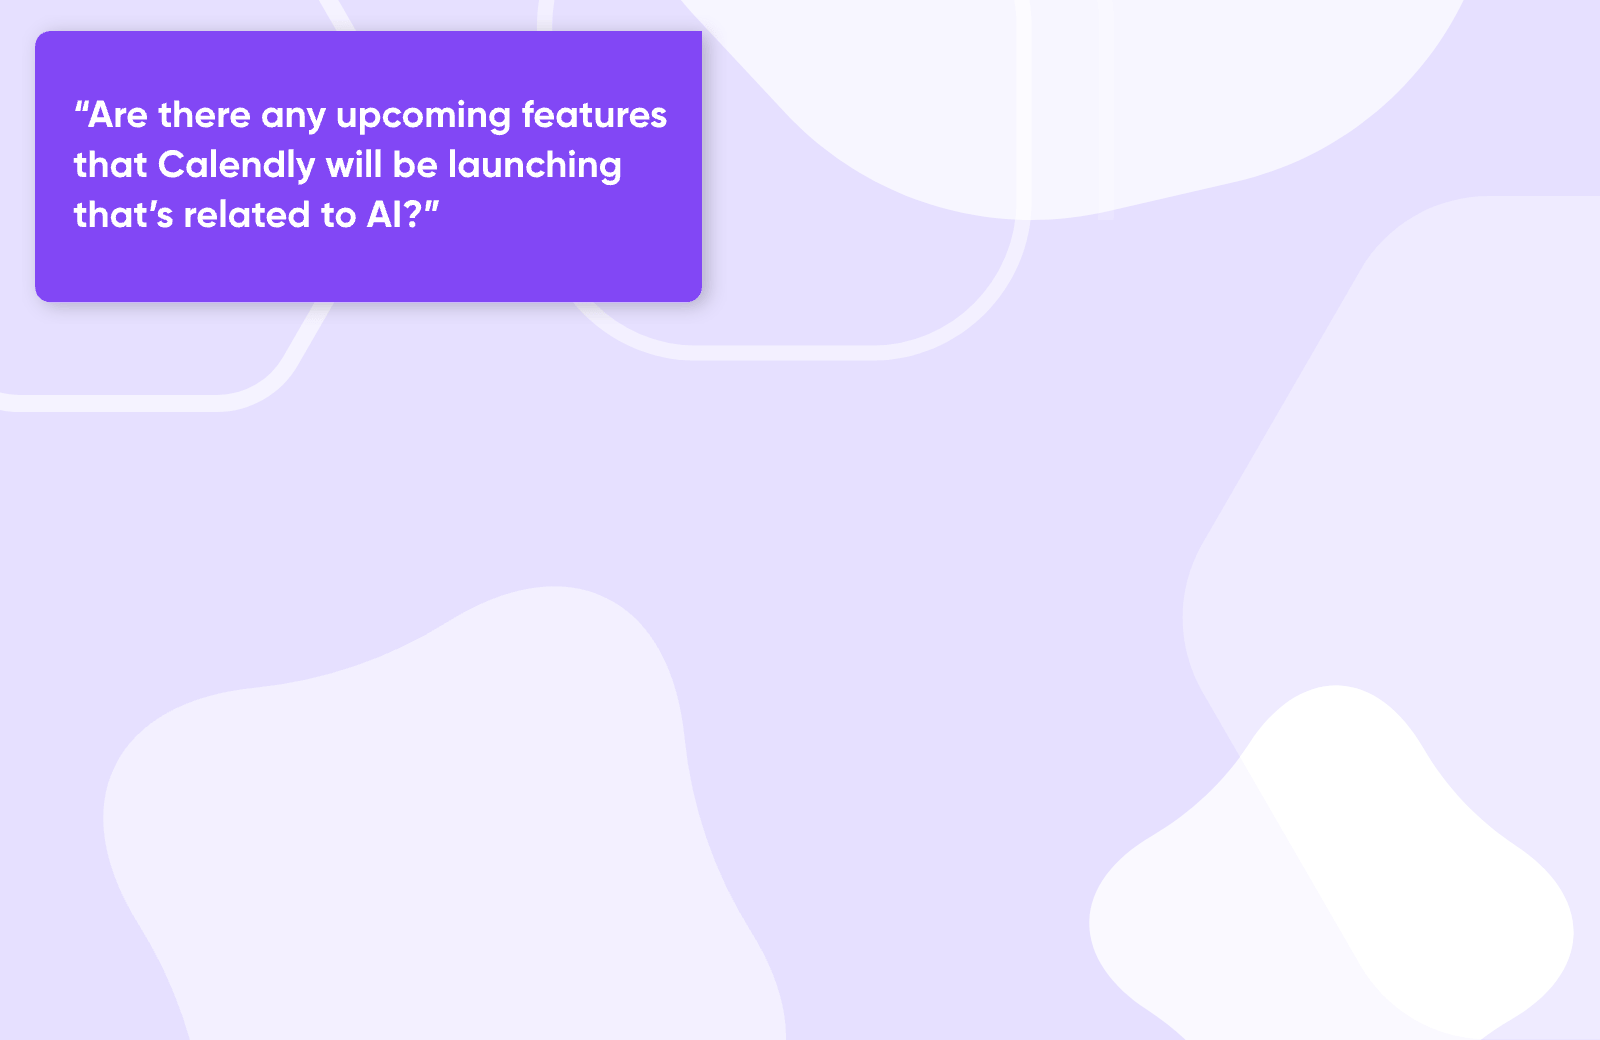 GIF showing quotes from Calendly customers asking about future AI features.